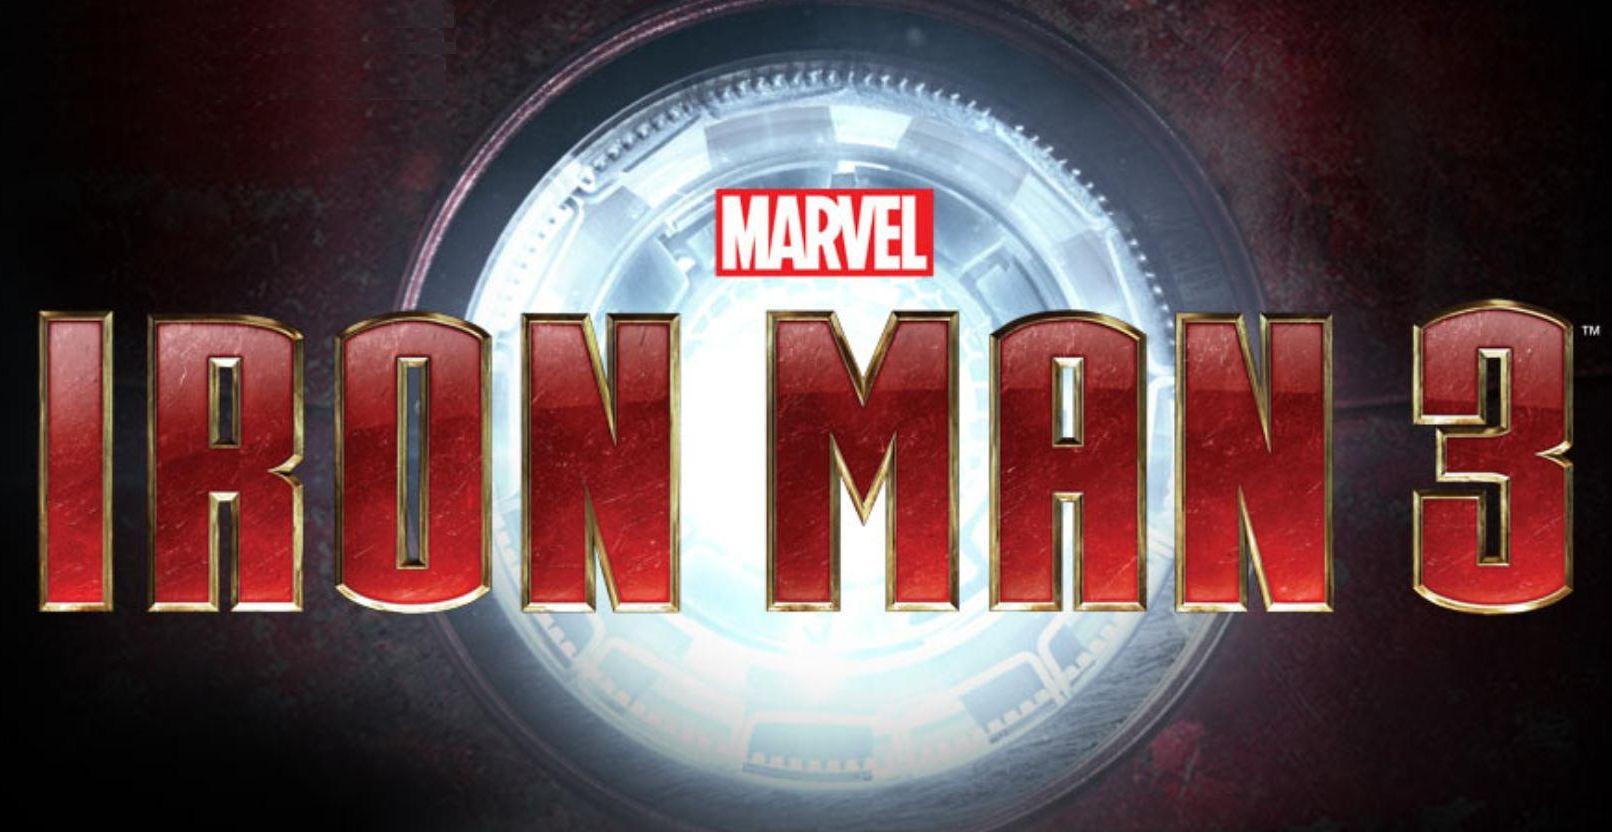 Iron Man 3 Logo - Check out the IRON MAN 3 Super Bowl Ad and an Extended Version